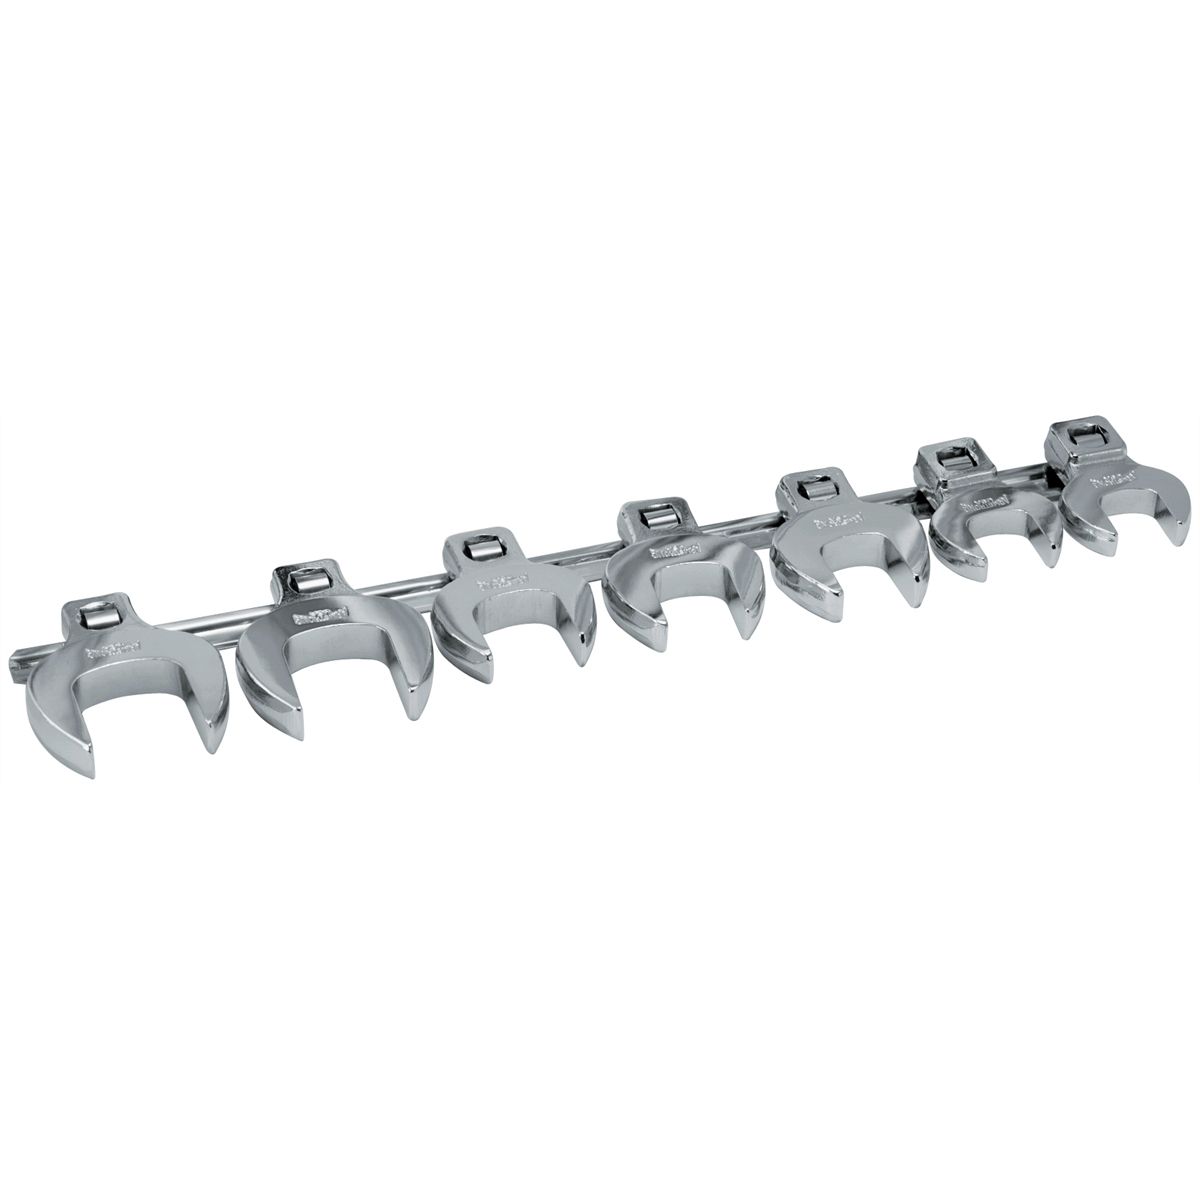 7 Piece 1/2" Drive Open End Crowfoot Wrench Set